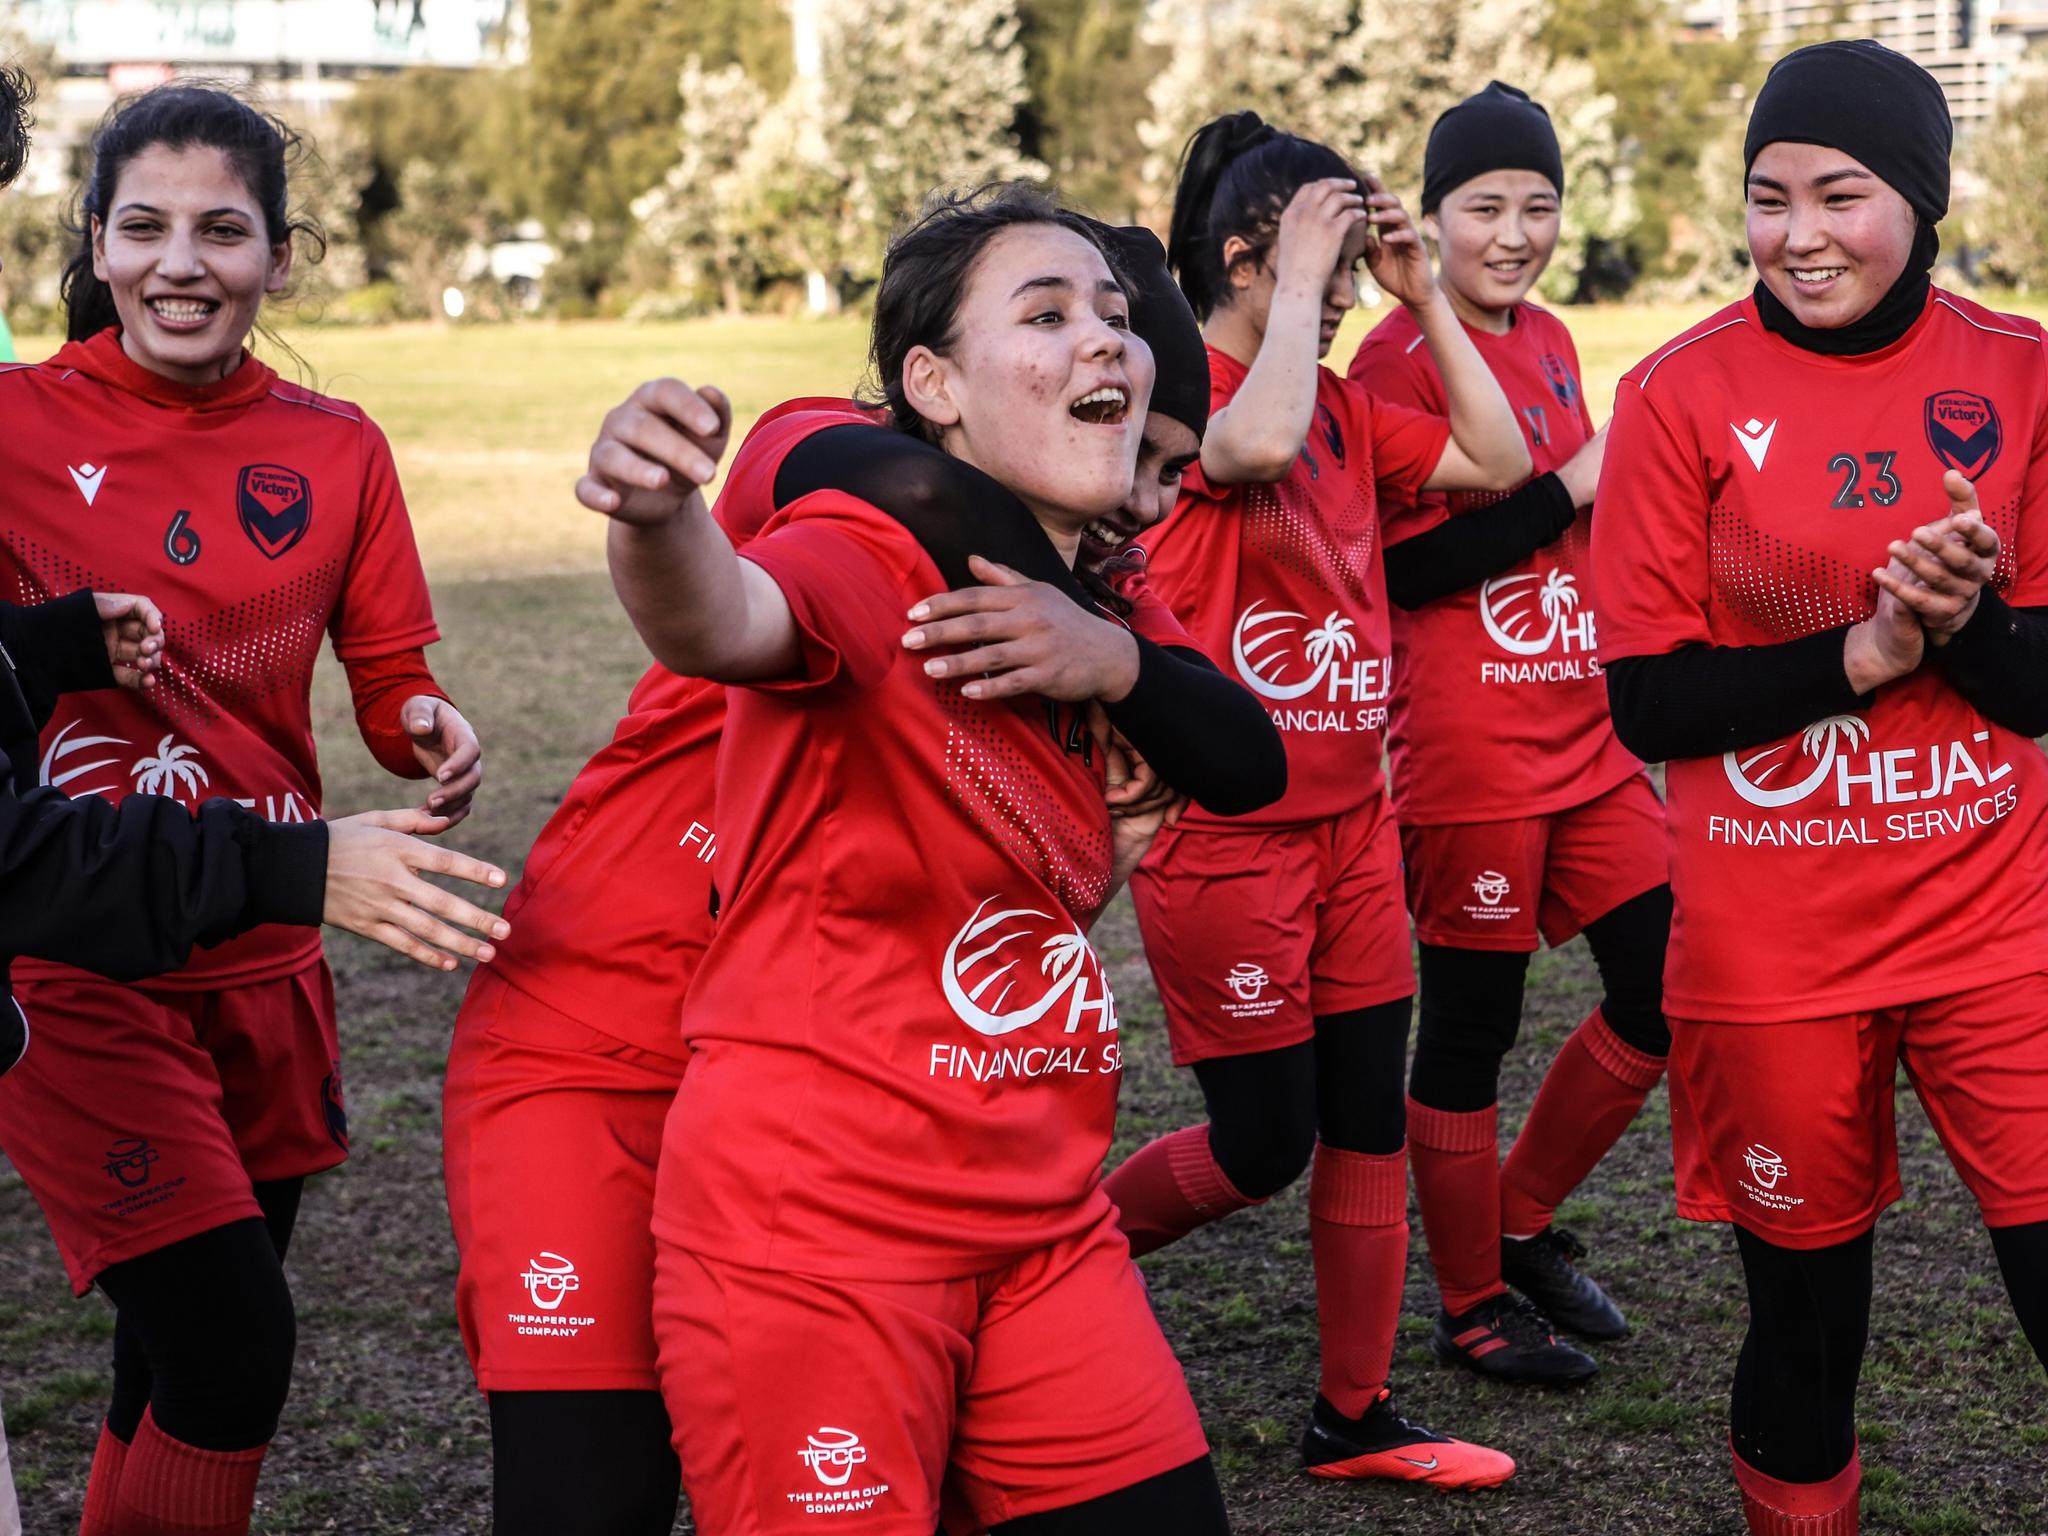 Afghanistan women's soccer team to debut uniforms with built-in